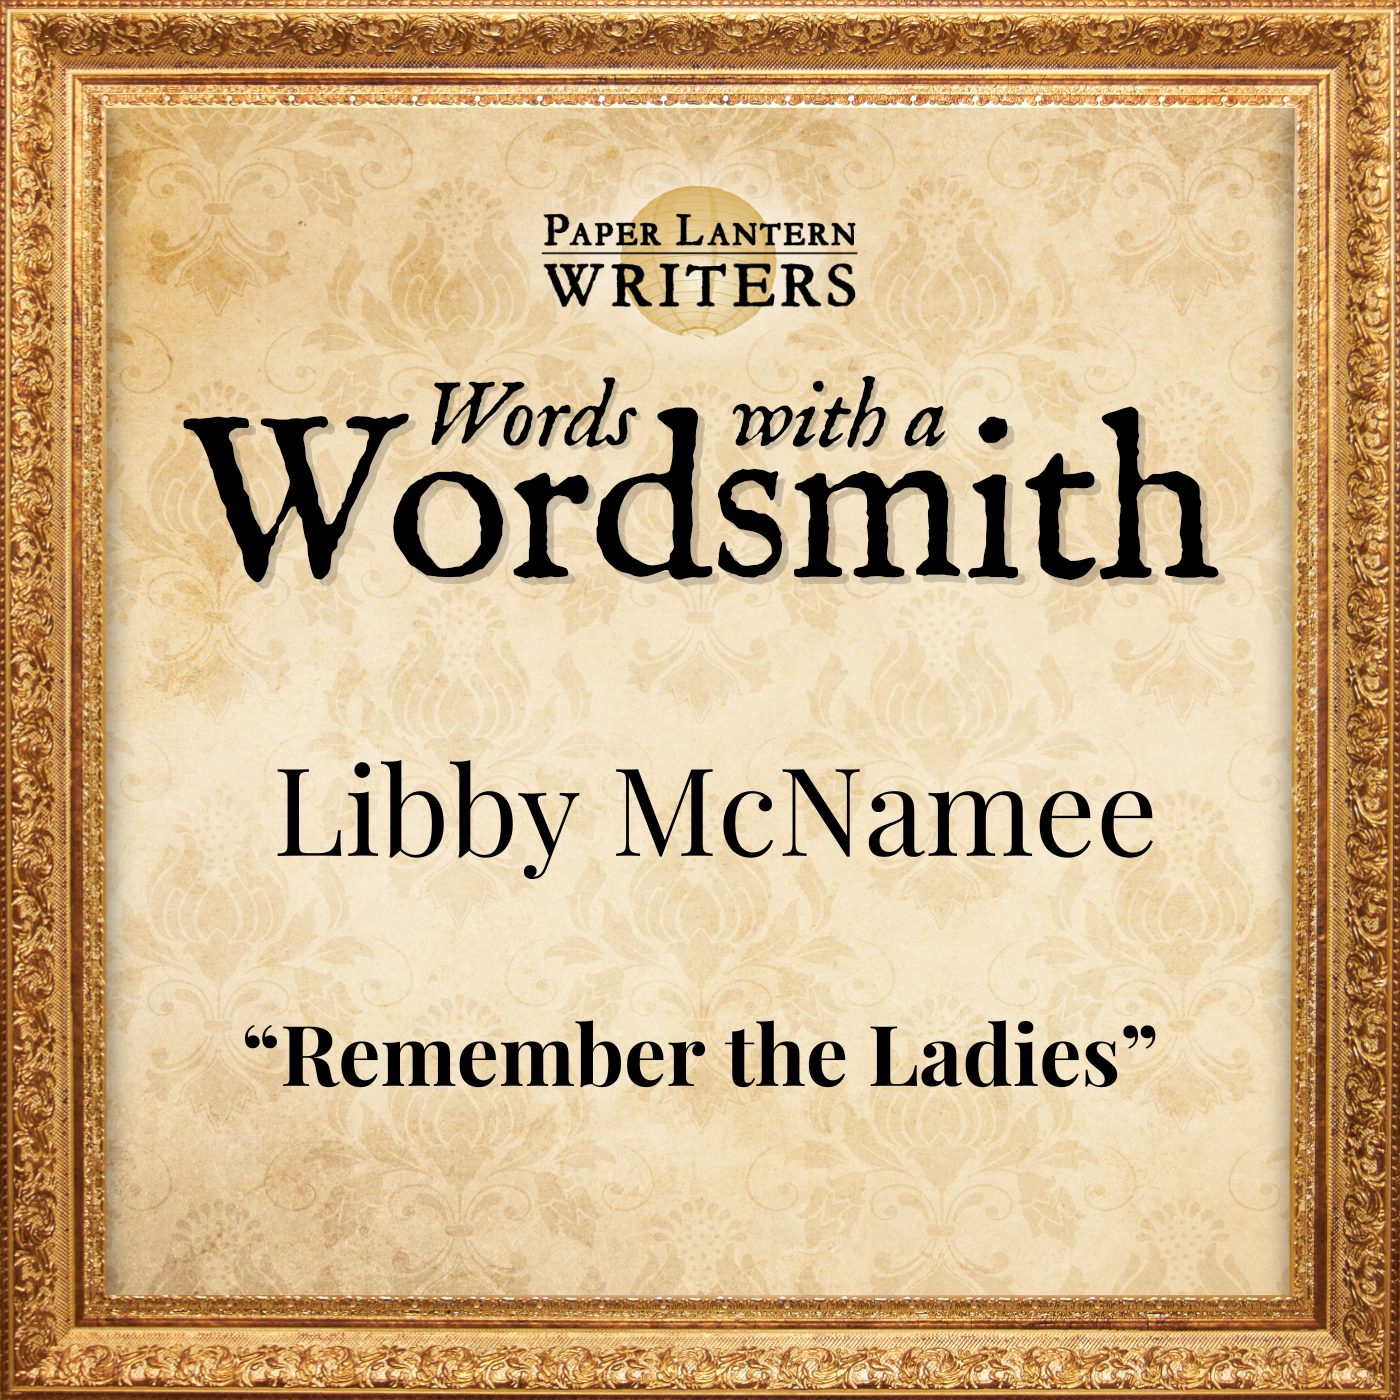 Words with a Wordsmith: Libby McNamee